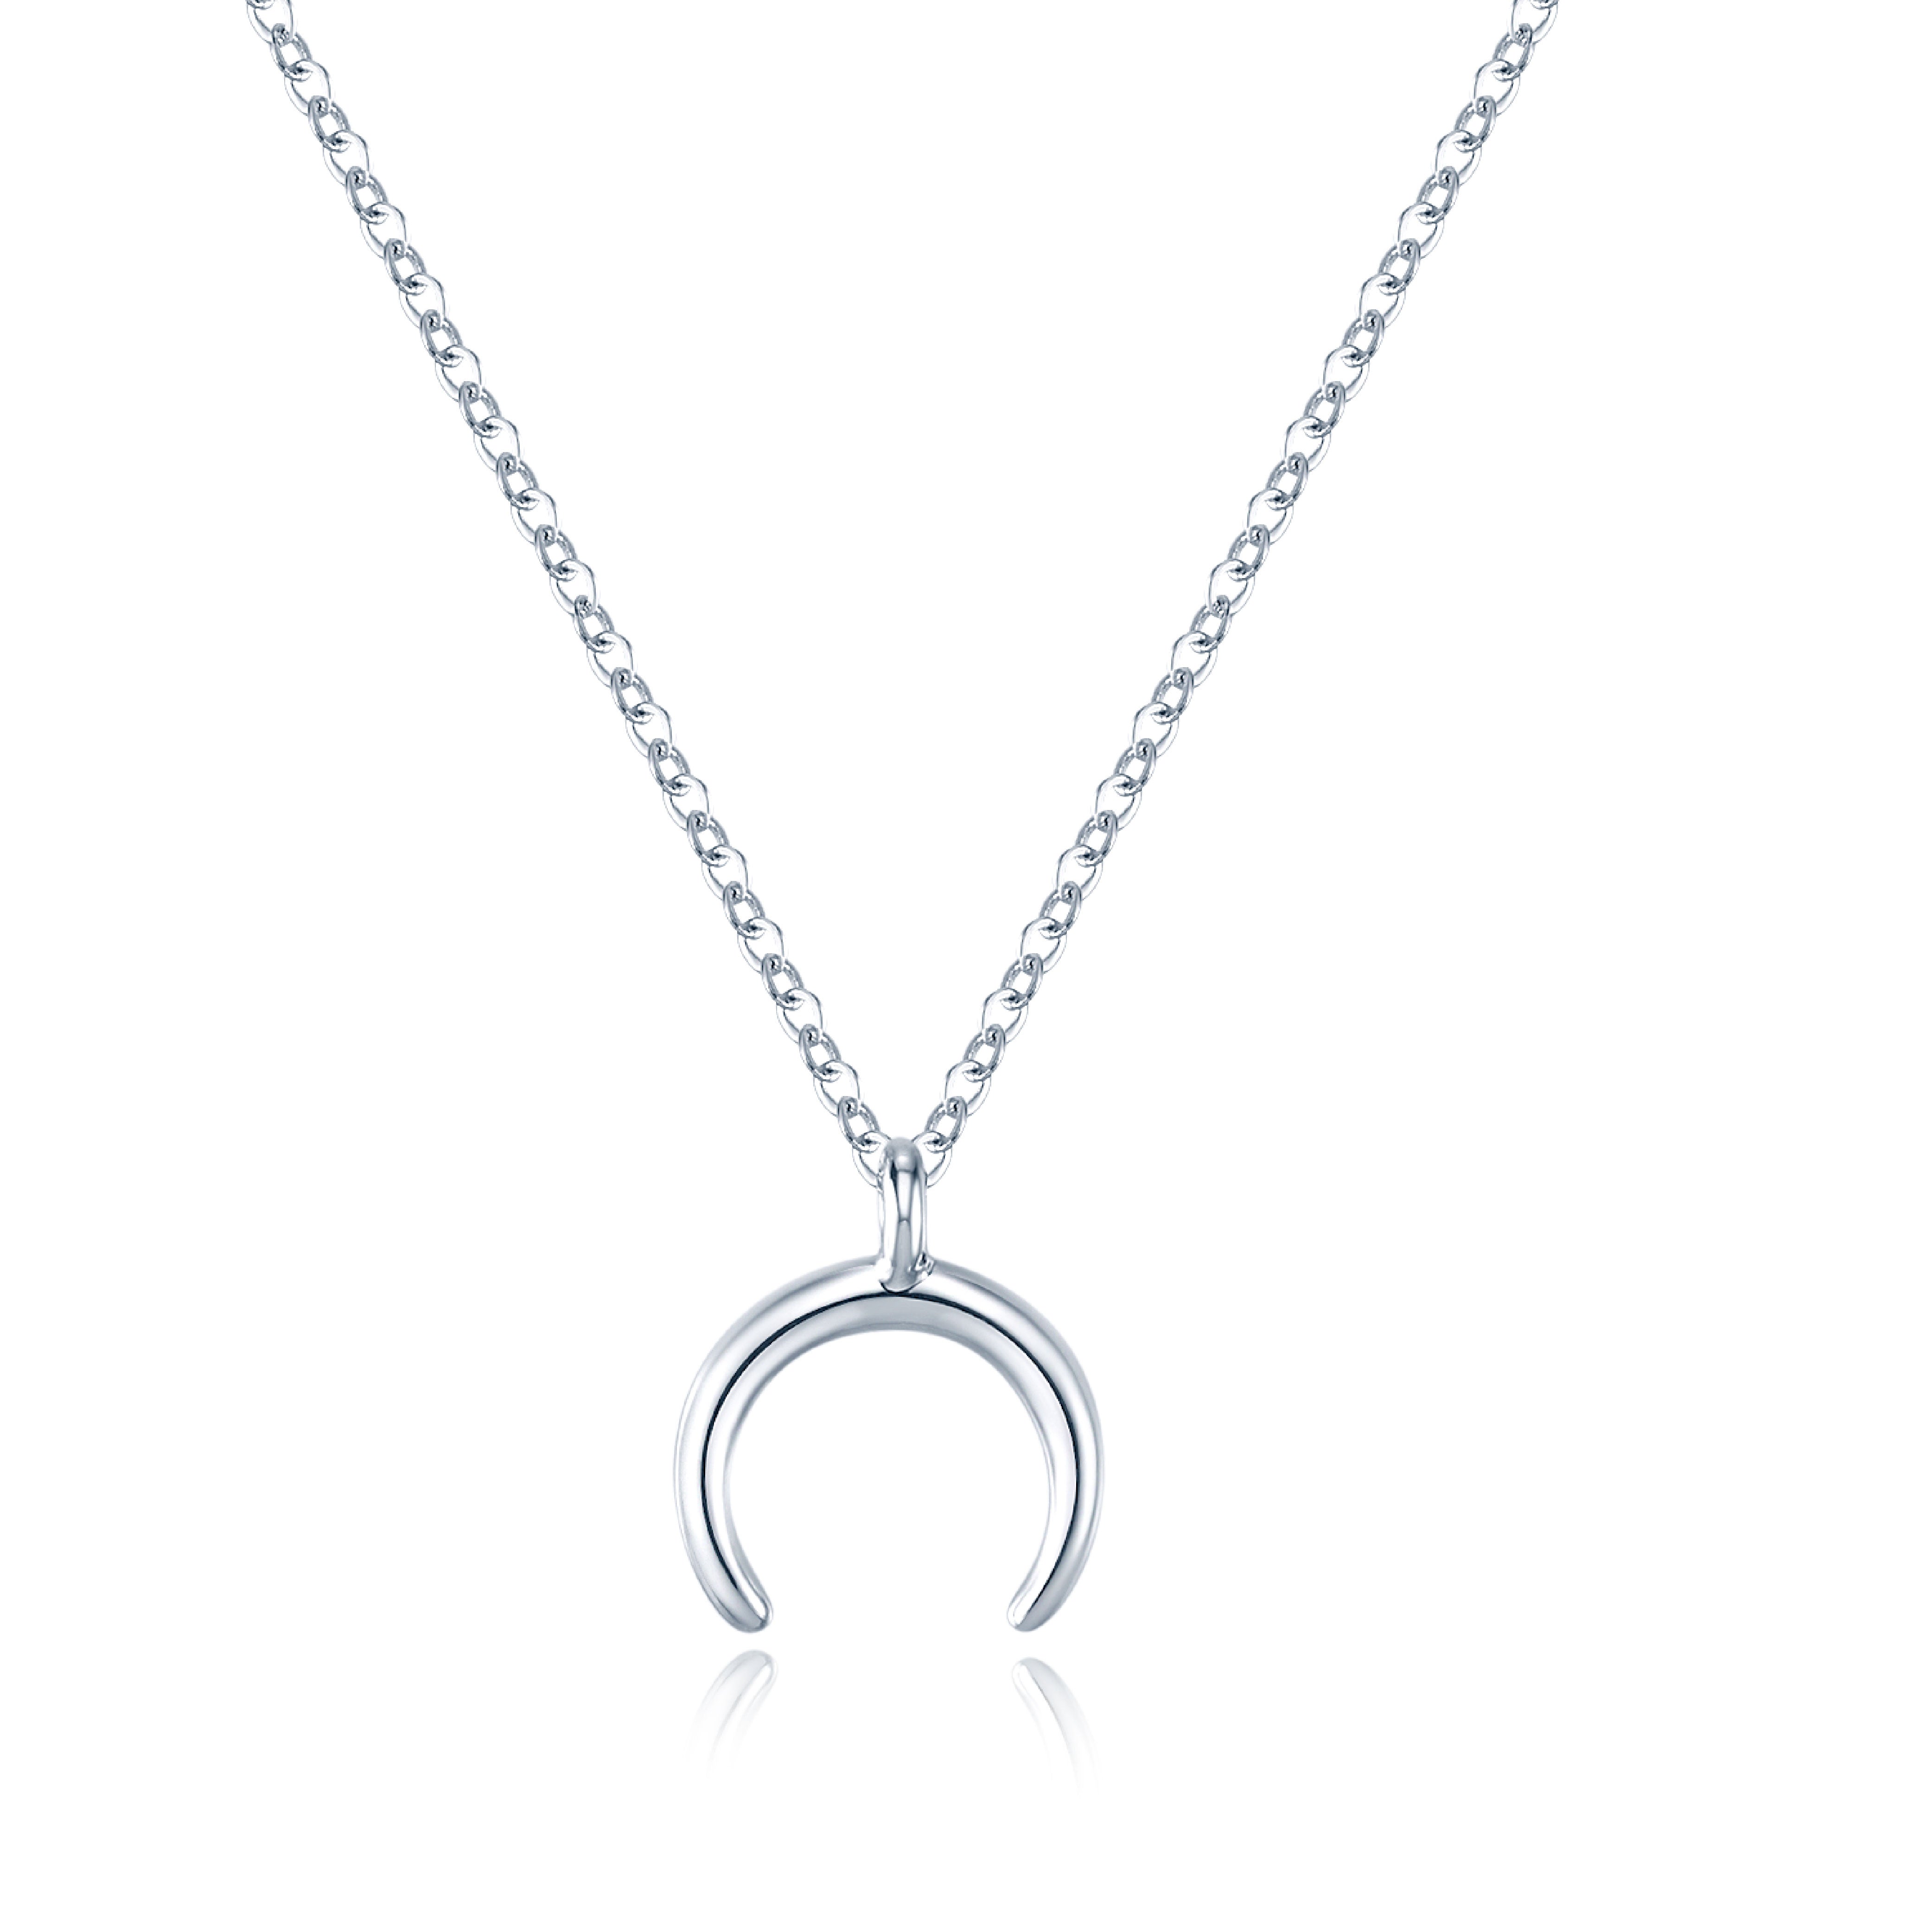 Besito Moon necklace 3 roll